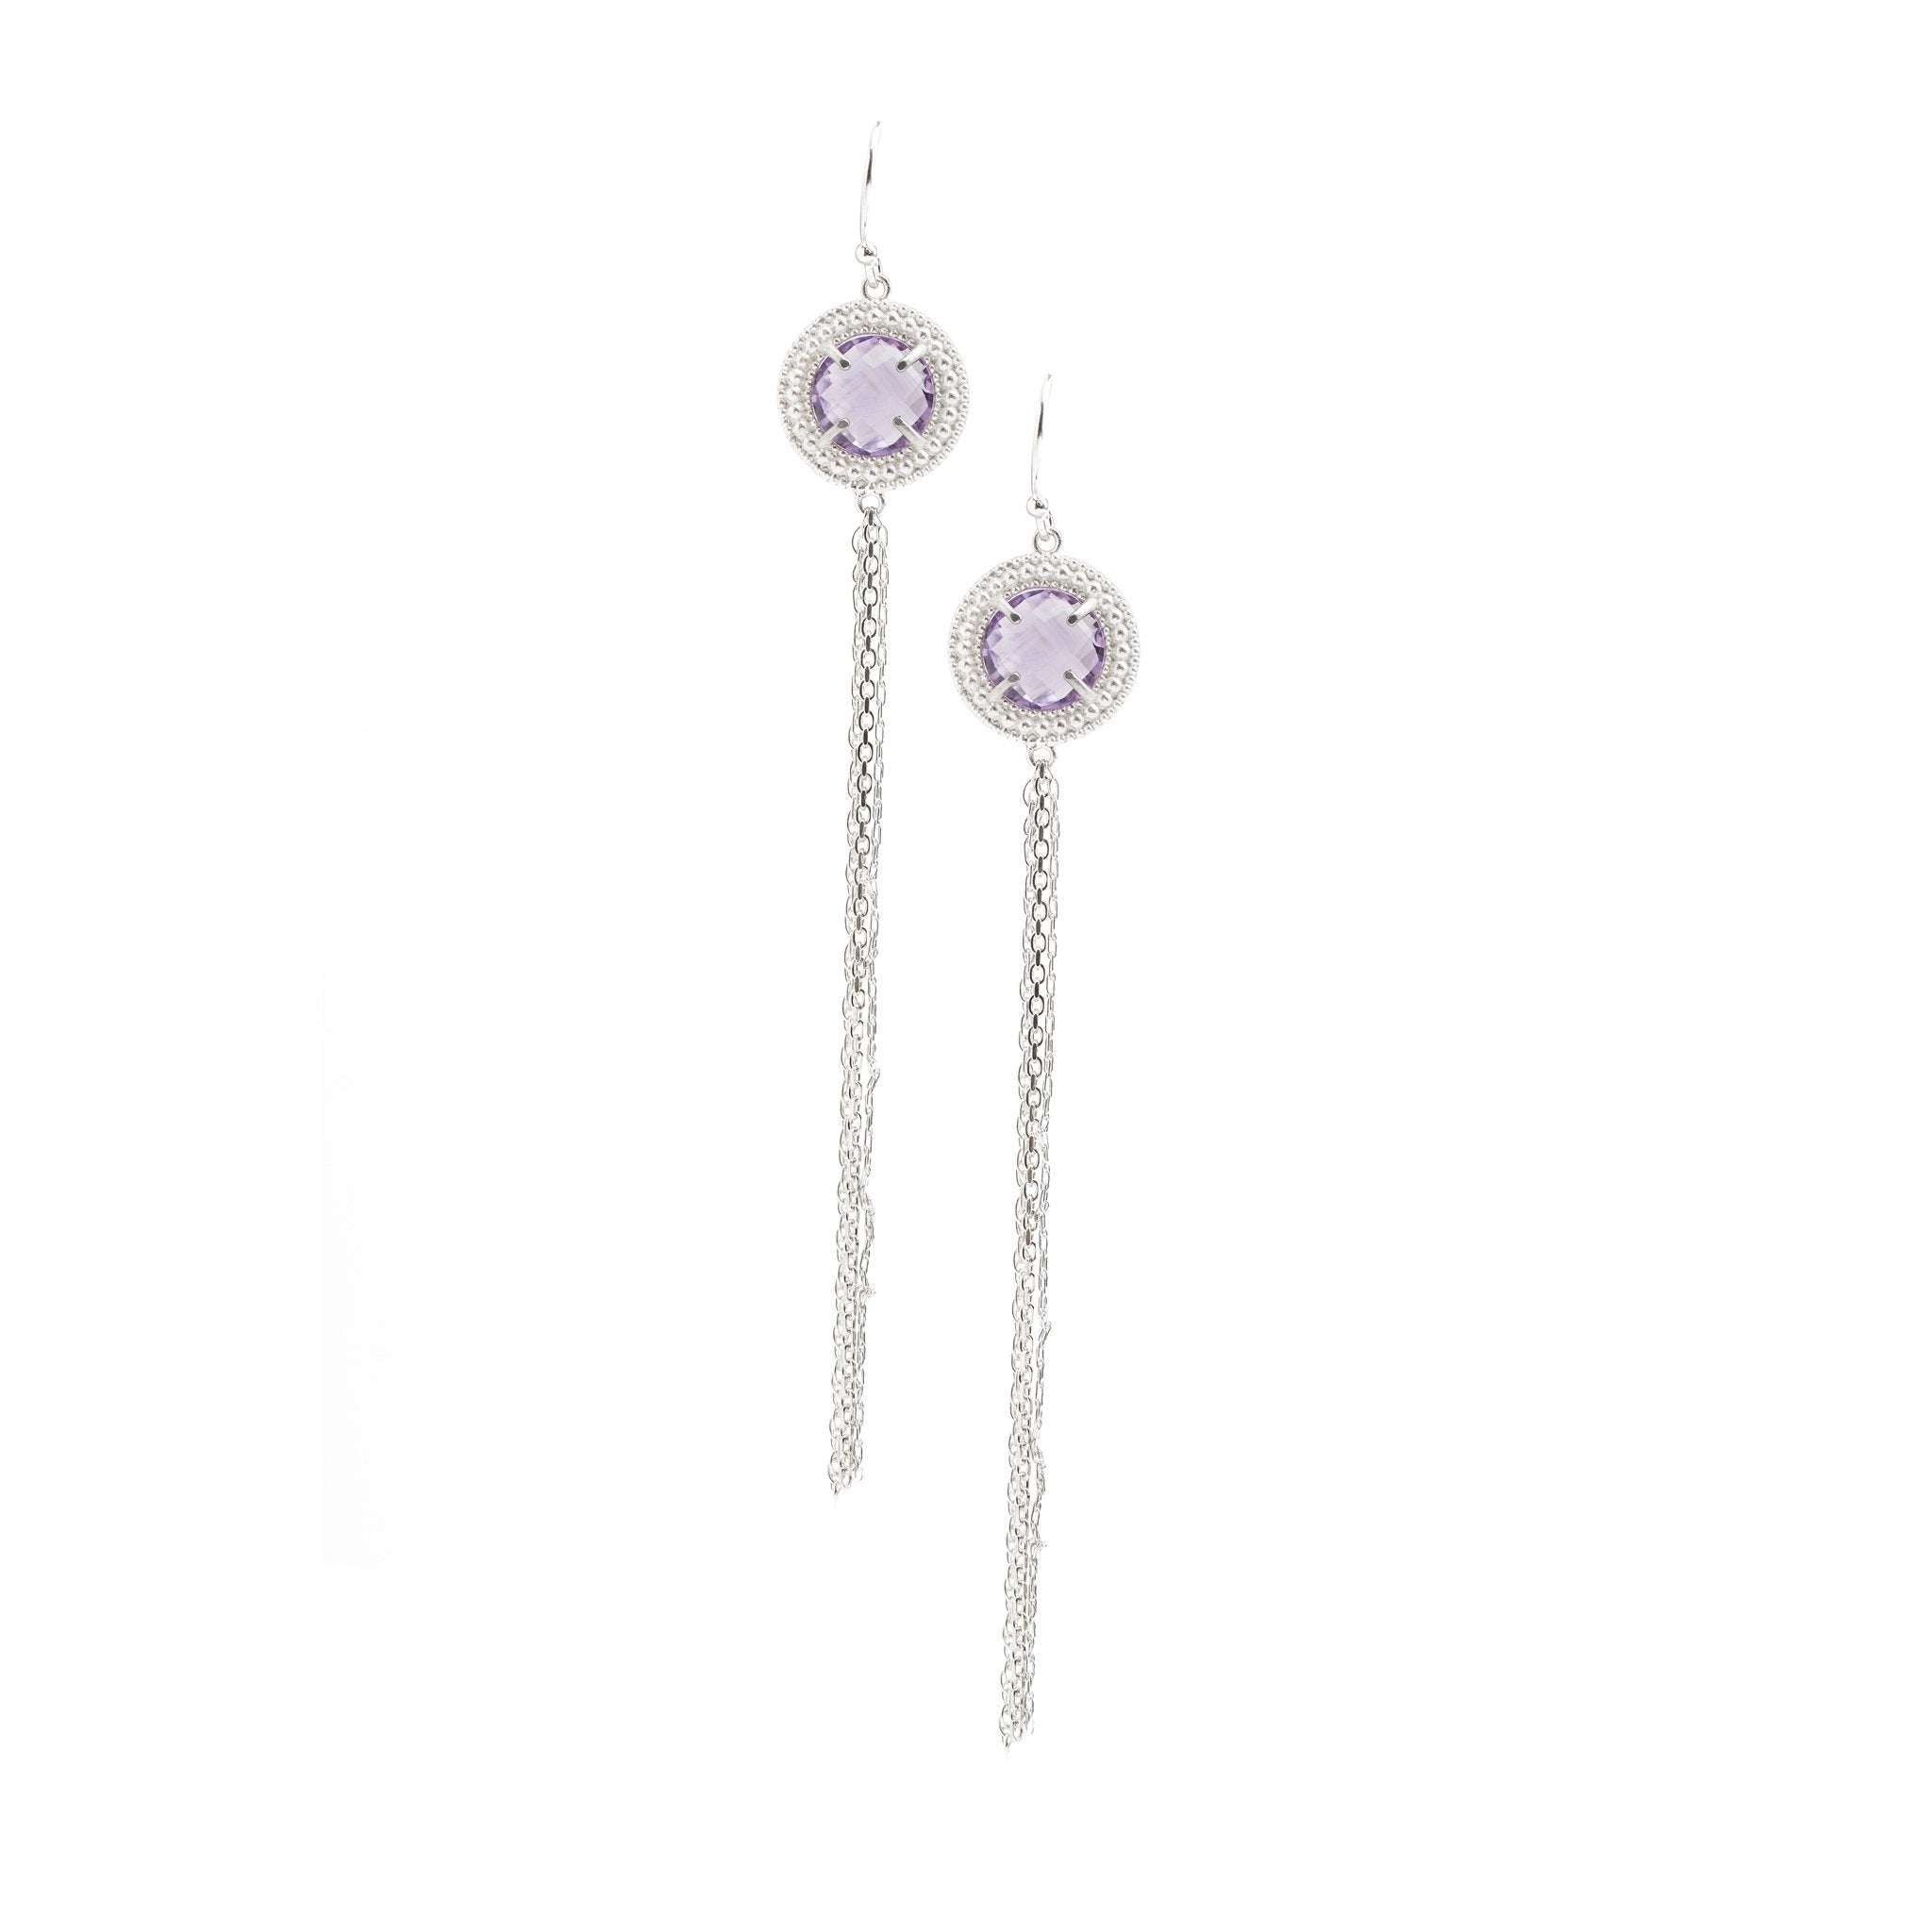 The Renaissance Ethnic earrings with Purple Amethysts. - Christelle Chamberland